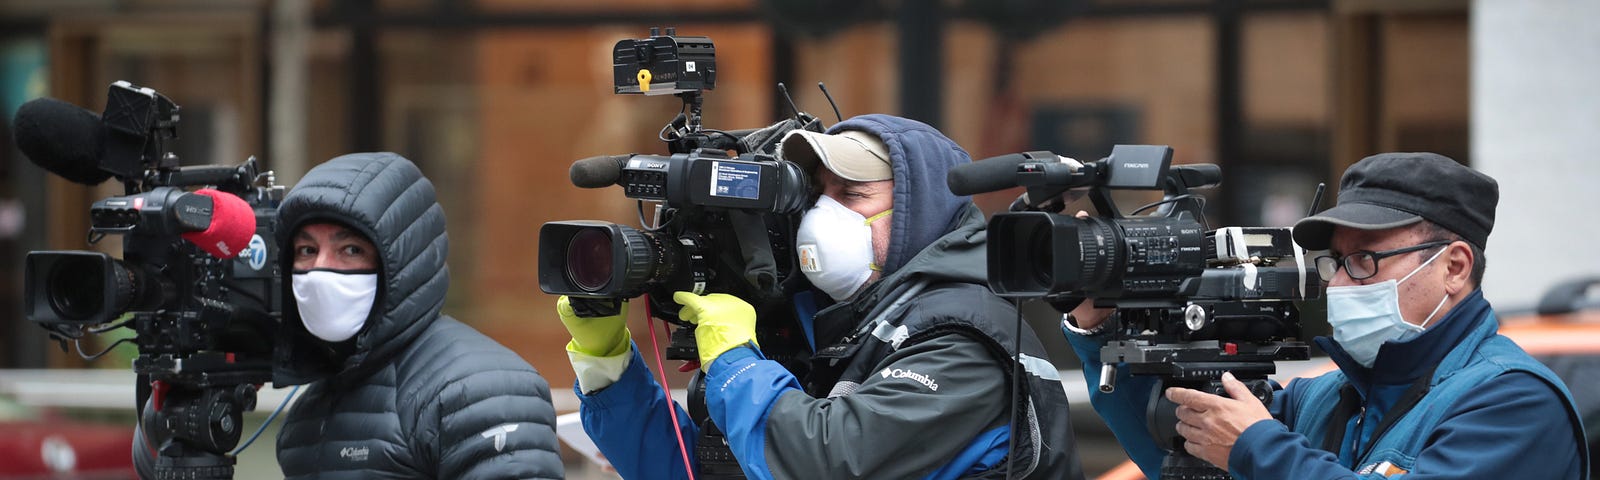 Journalists wearing masks and using cameras to document a protest in Chicago, IL